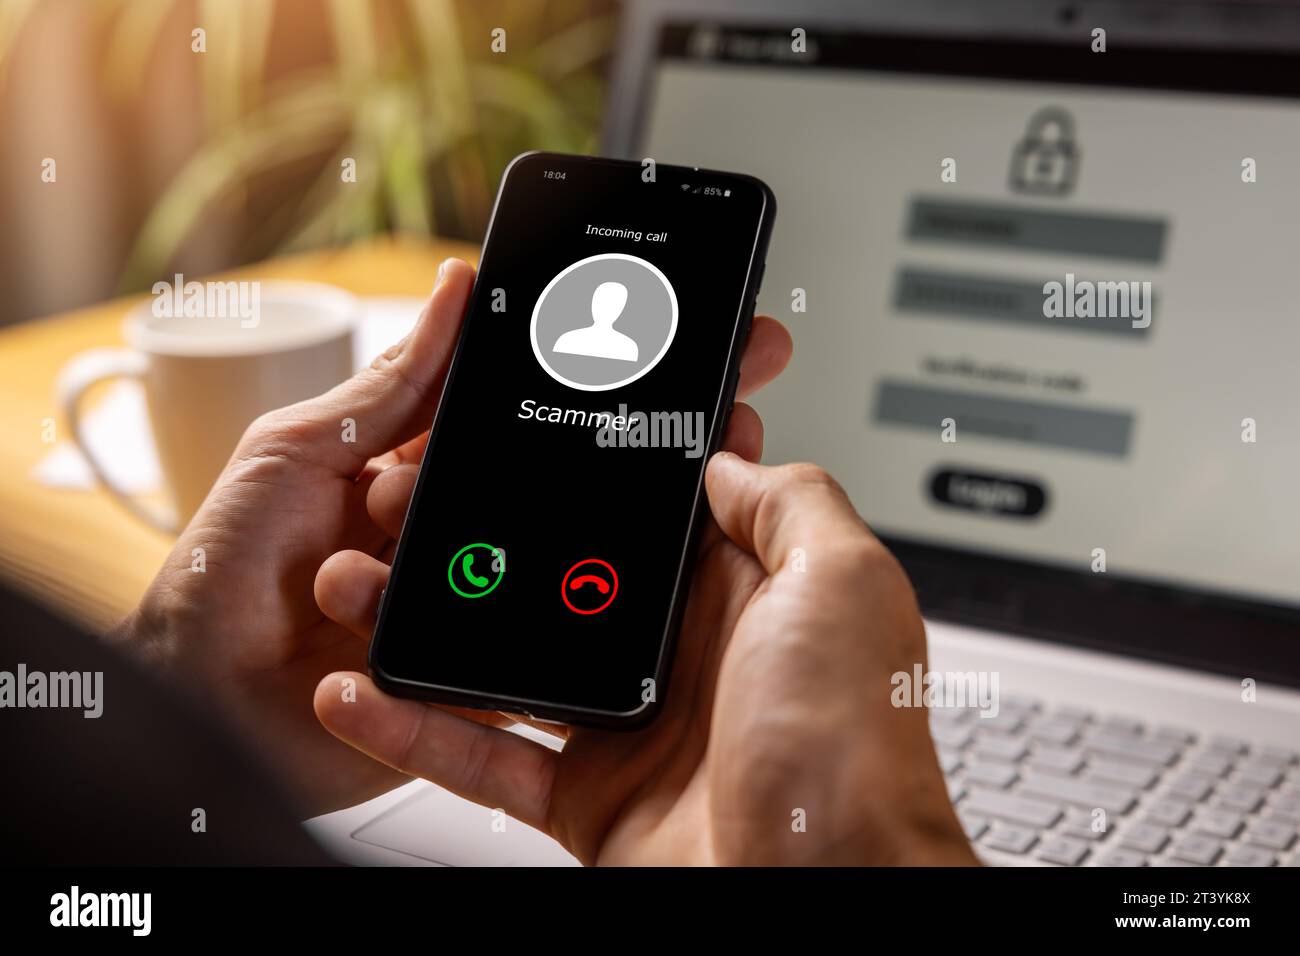 phishing - hands holding phone with incoming call from scammer Stock Photo